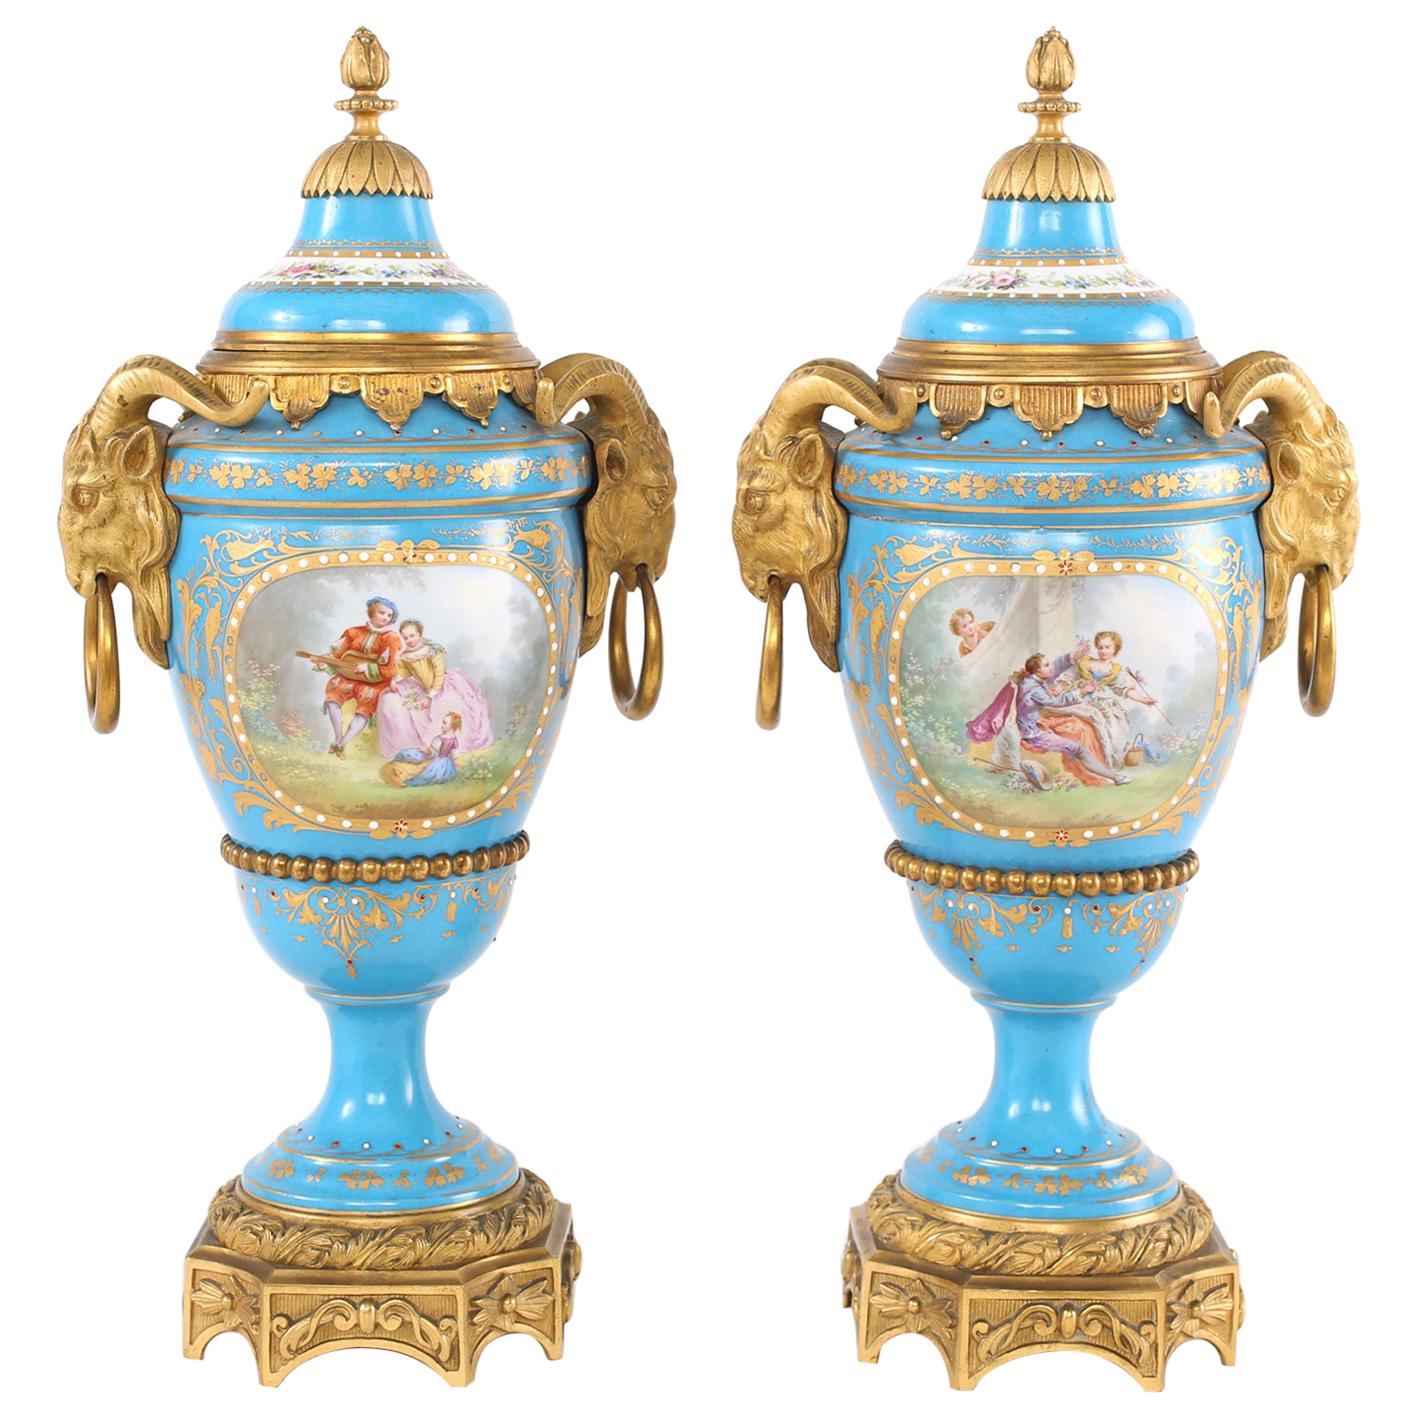 19th Century Bronze Mounted / Porcelain Covered Urns